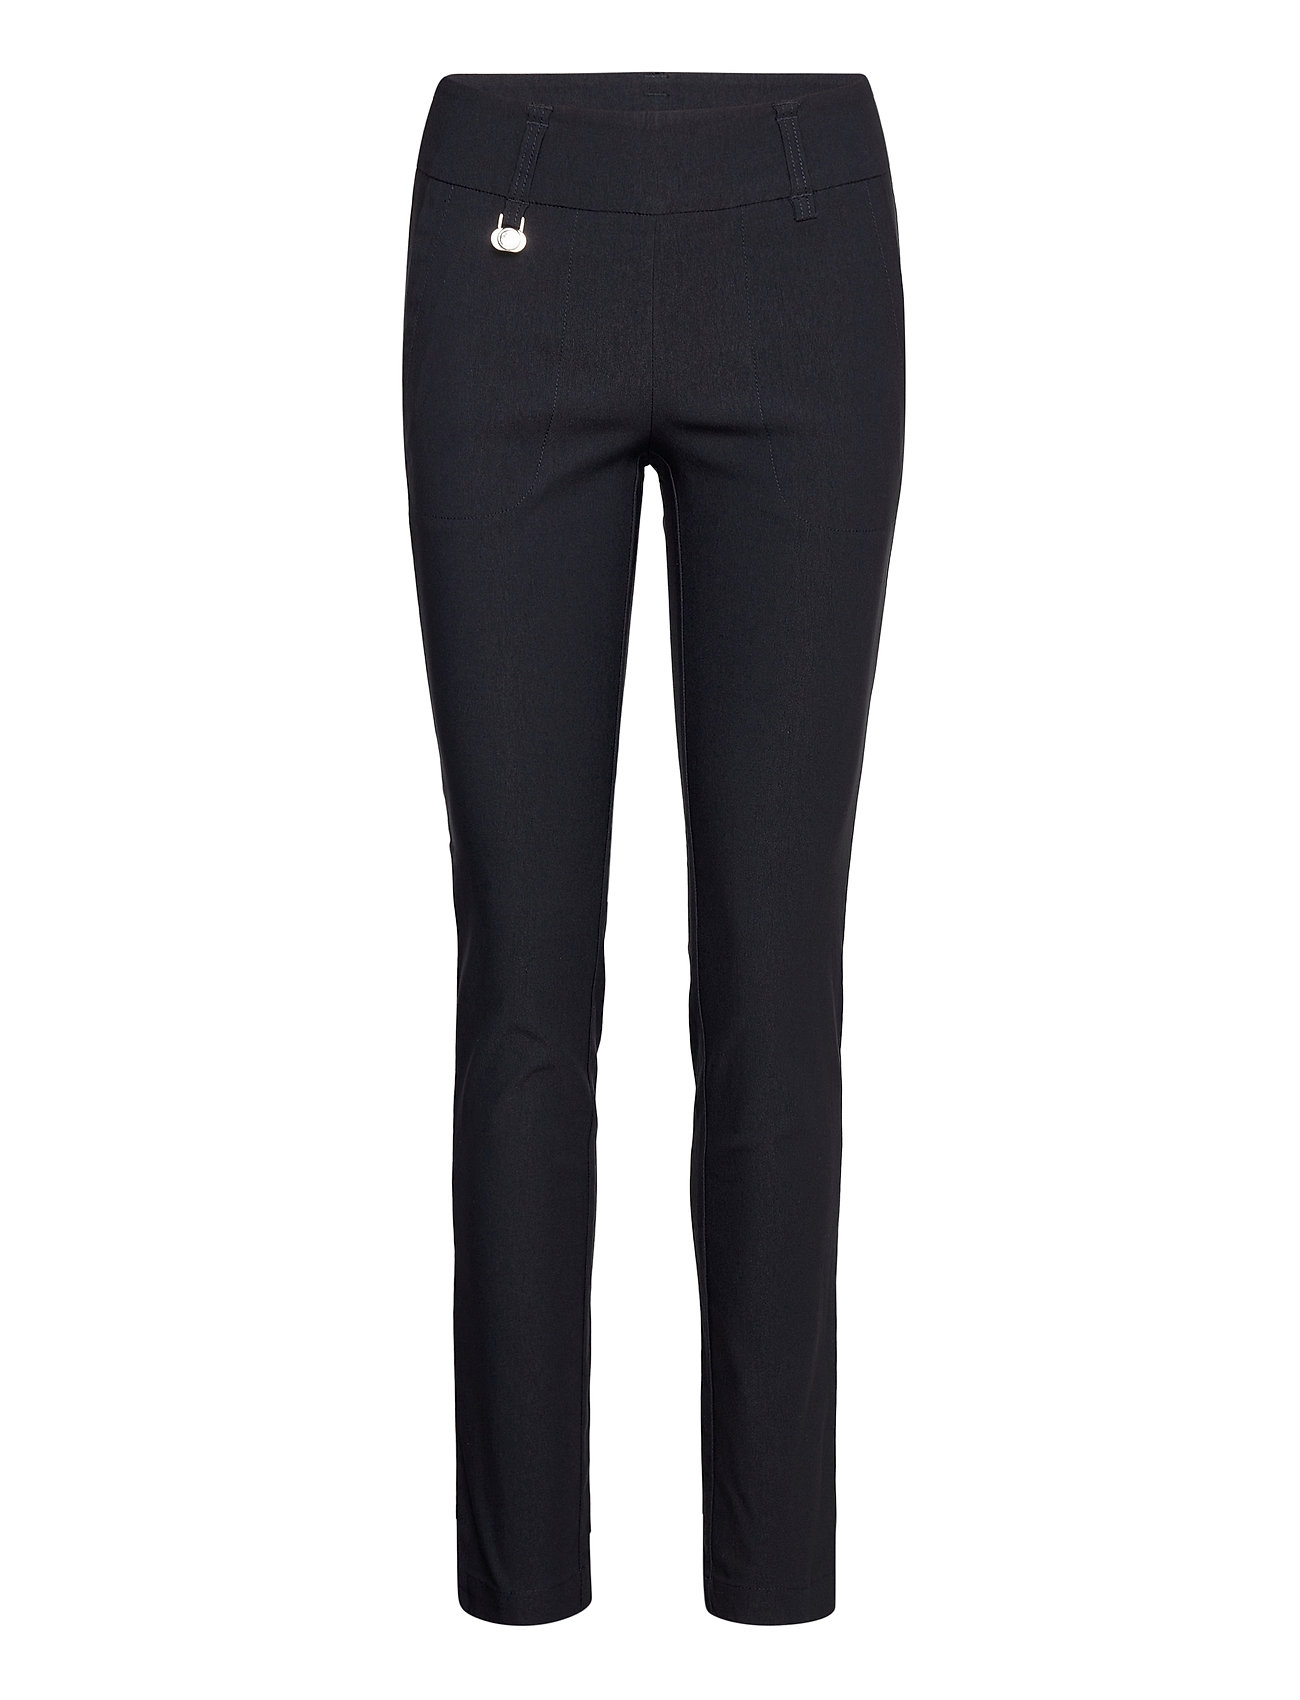 DAILY SPORTS Magic Warm Trousers 32 Inch 211 Navy